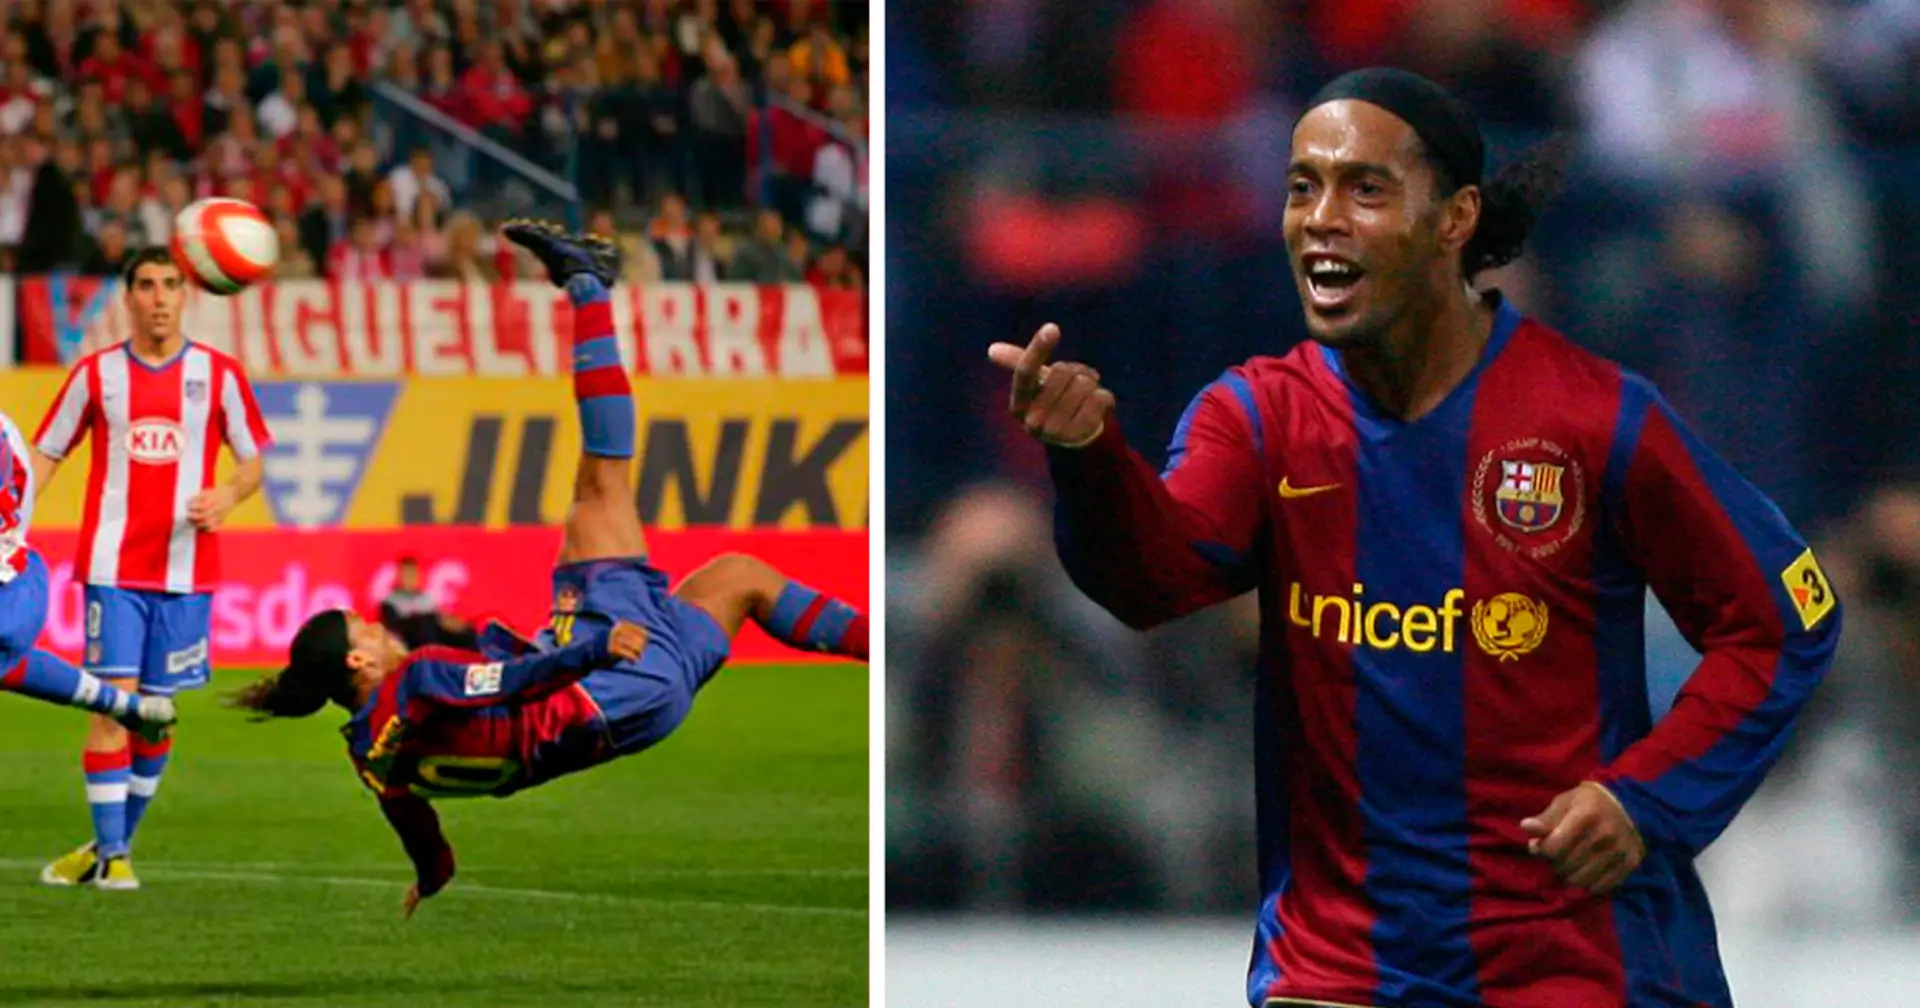 On this day 16 years ago, Ronaldinho scored his last goal for Barcelona - and what a goal it was!